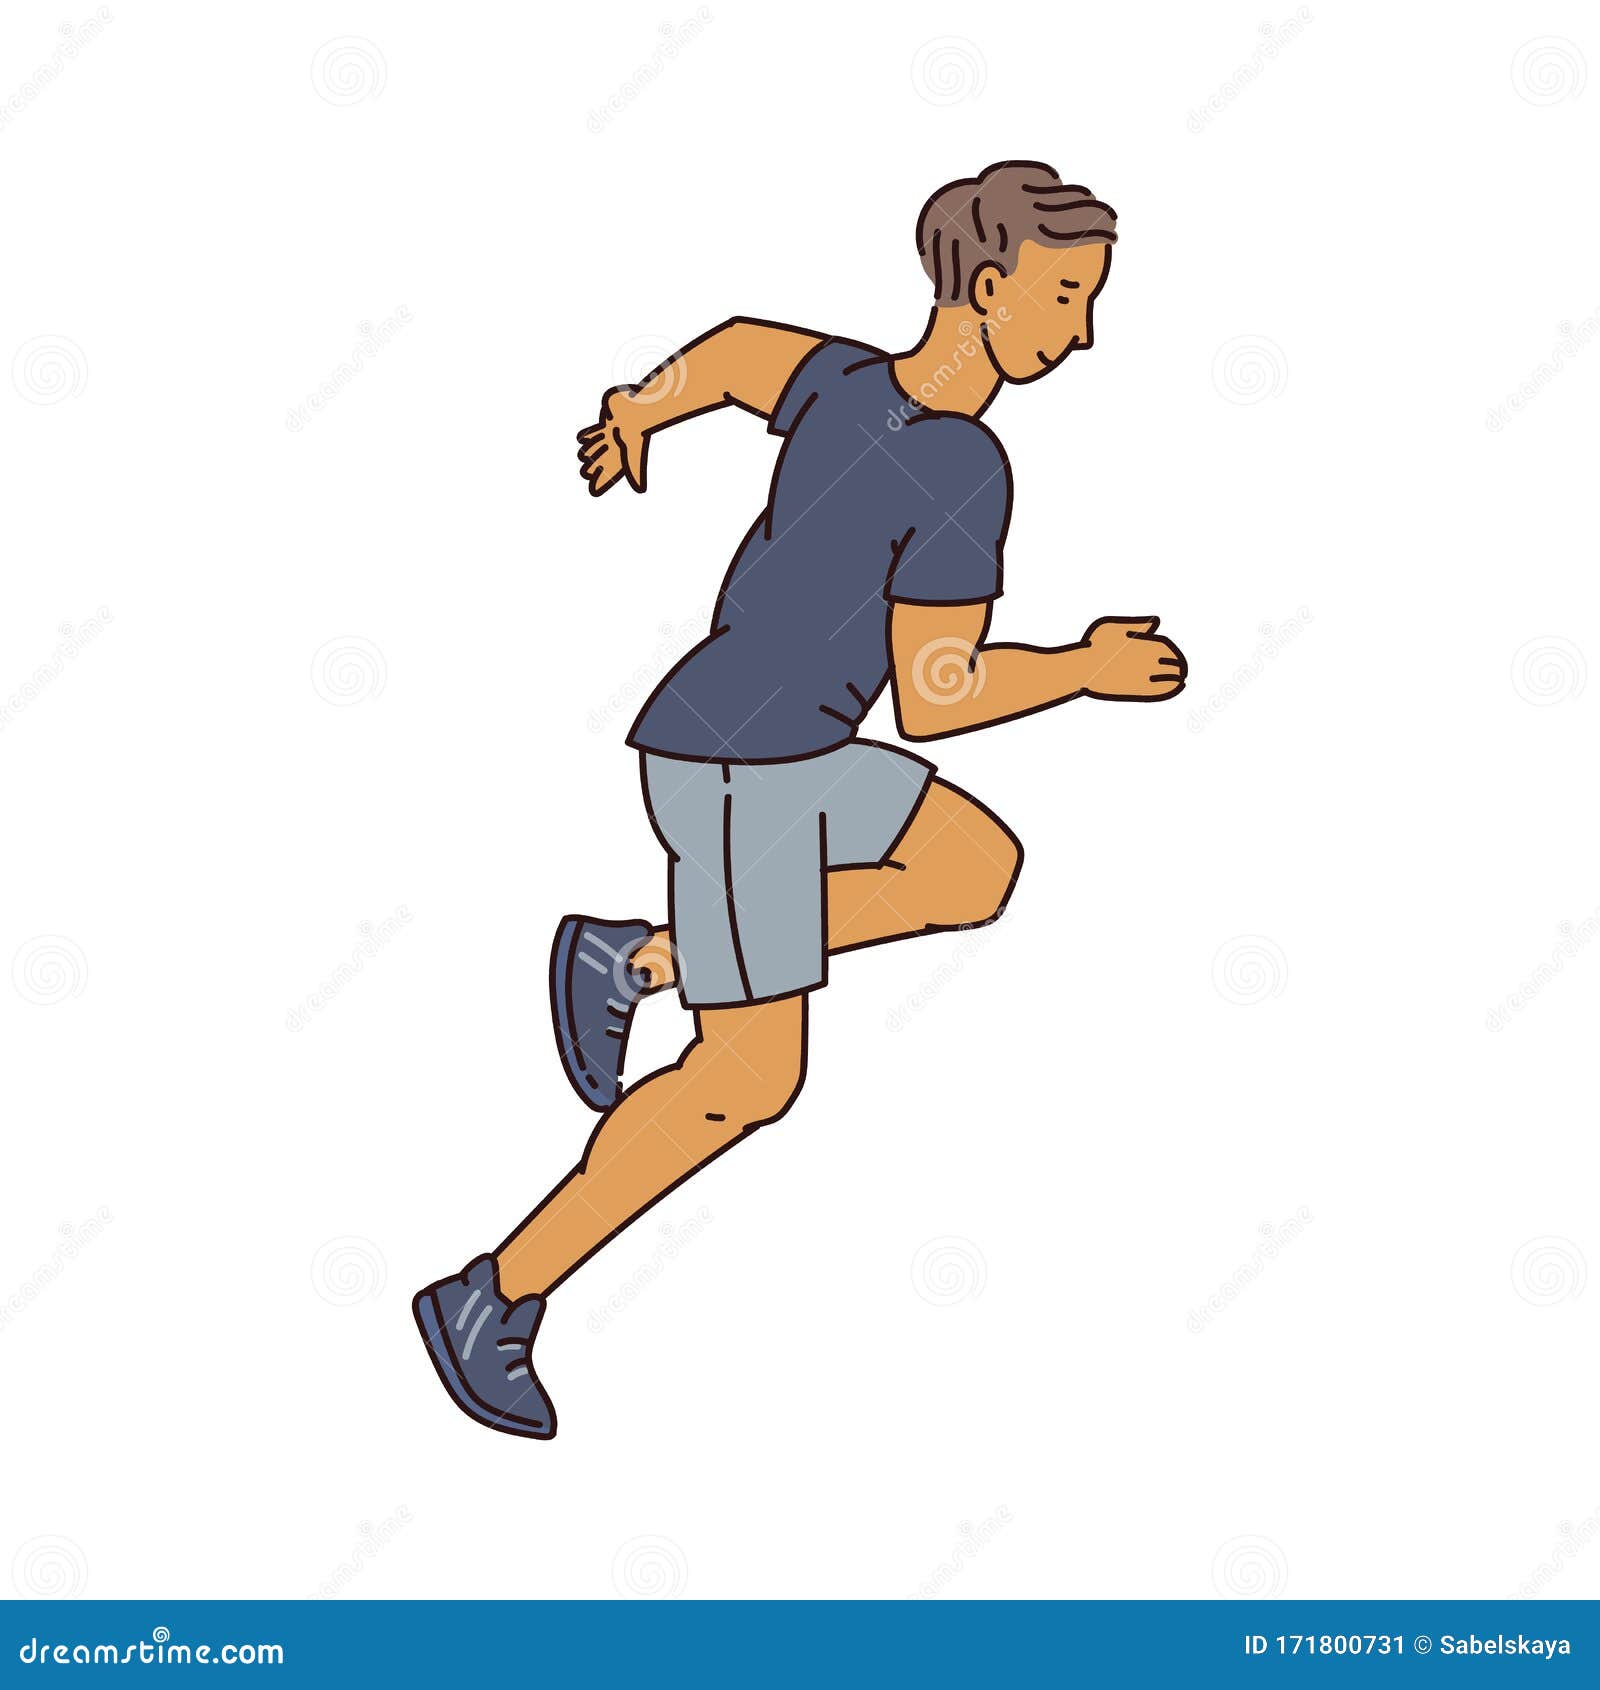 Runner Athlete Male Character Vector Illustration in Sketch Style ...